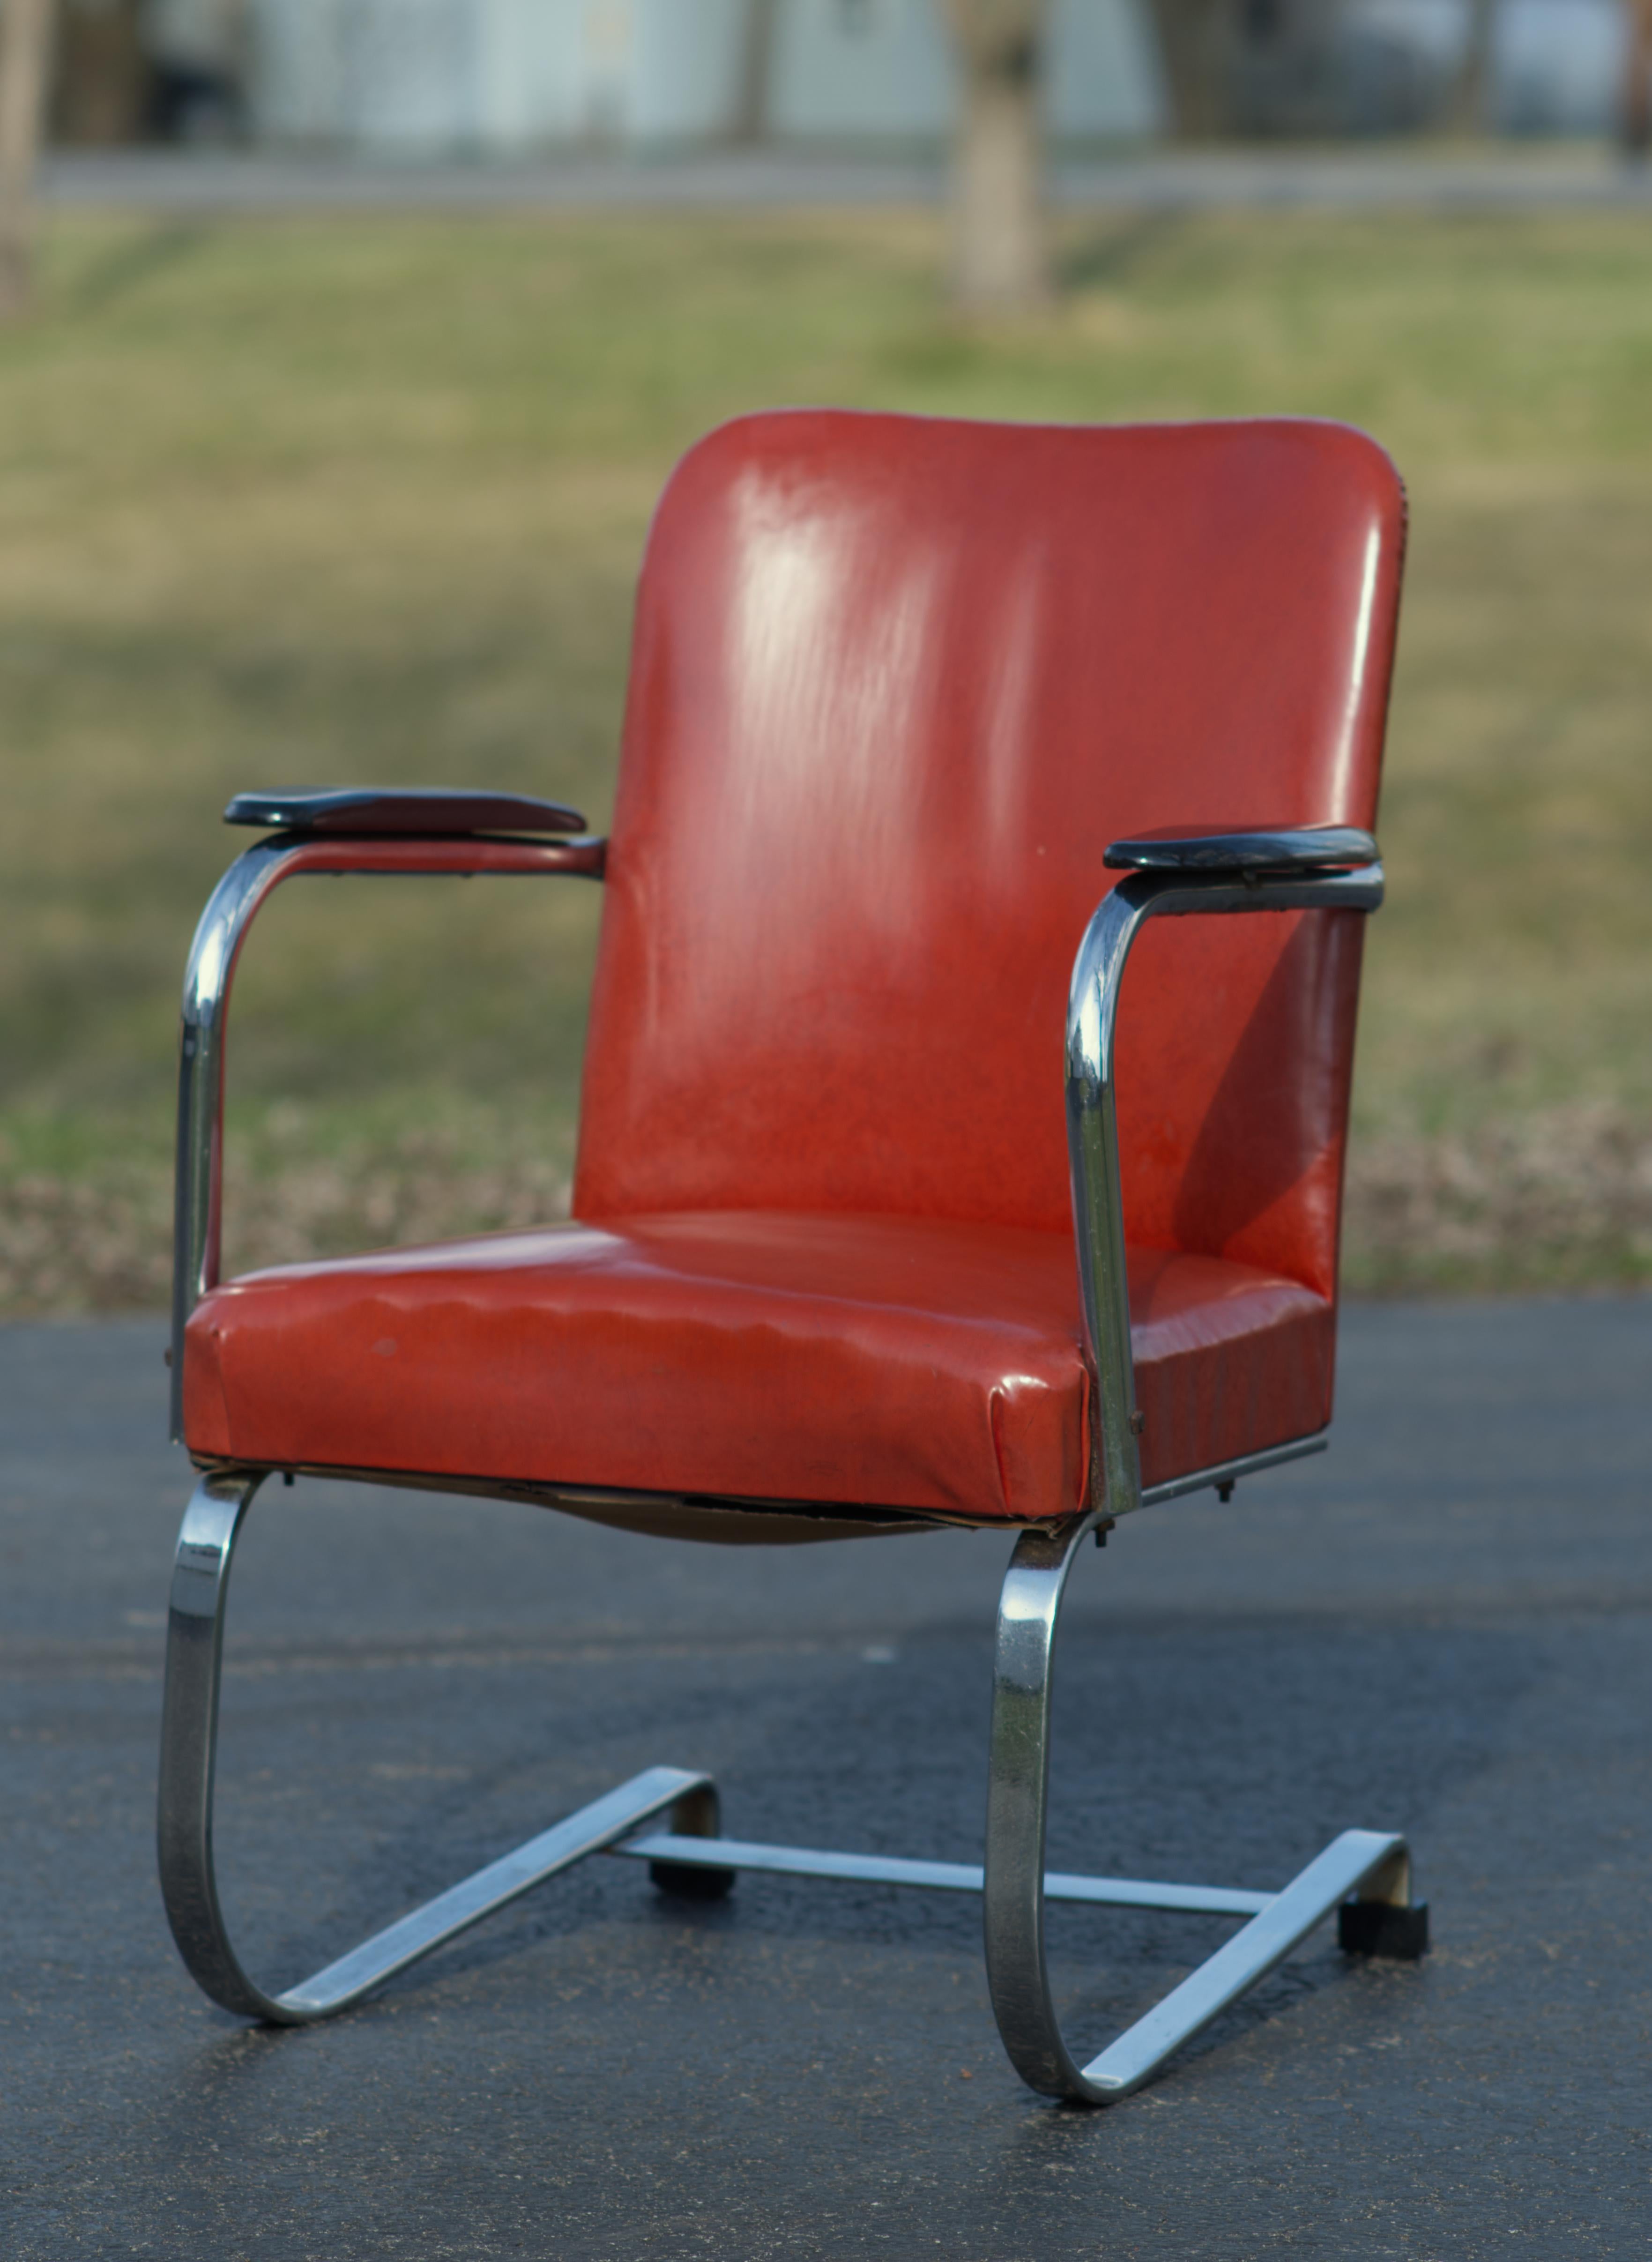 Lovely example of (Karl Emmanuel Martin)  Kem Weber Cantilever Lounge Chair manufactured by Lloyd. 
Vinyl is in a surprisingly good condition with few minor pinhead size spots. It is red/coral color. No tears or cracks. 
Chrome plating is worn out